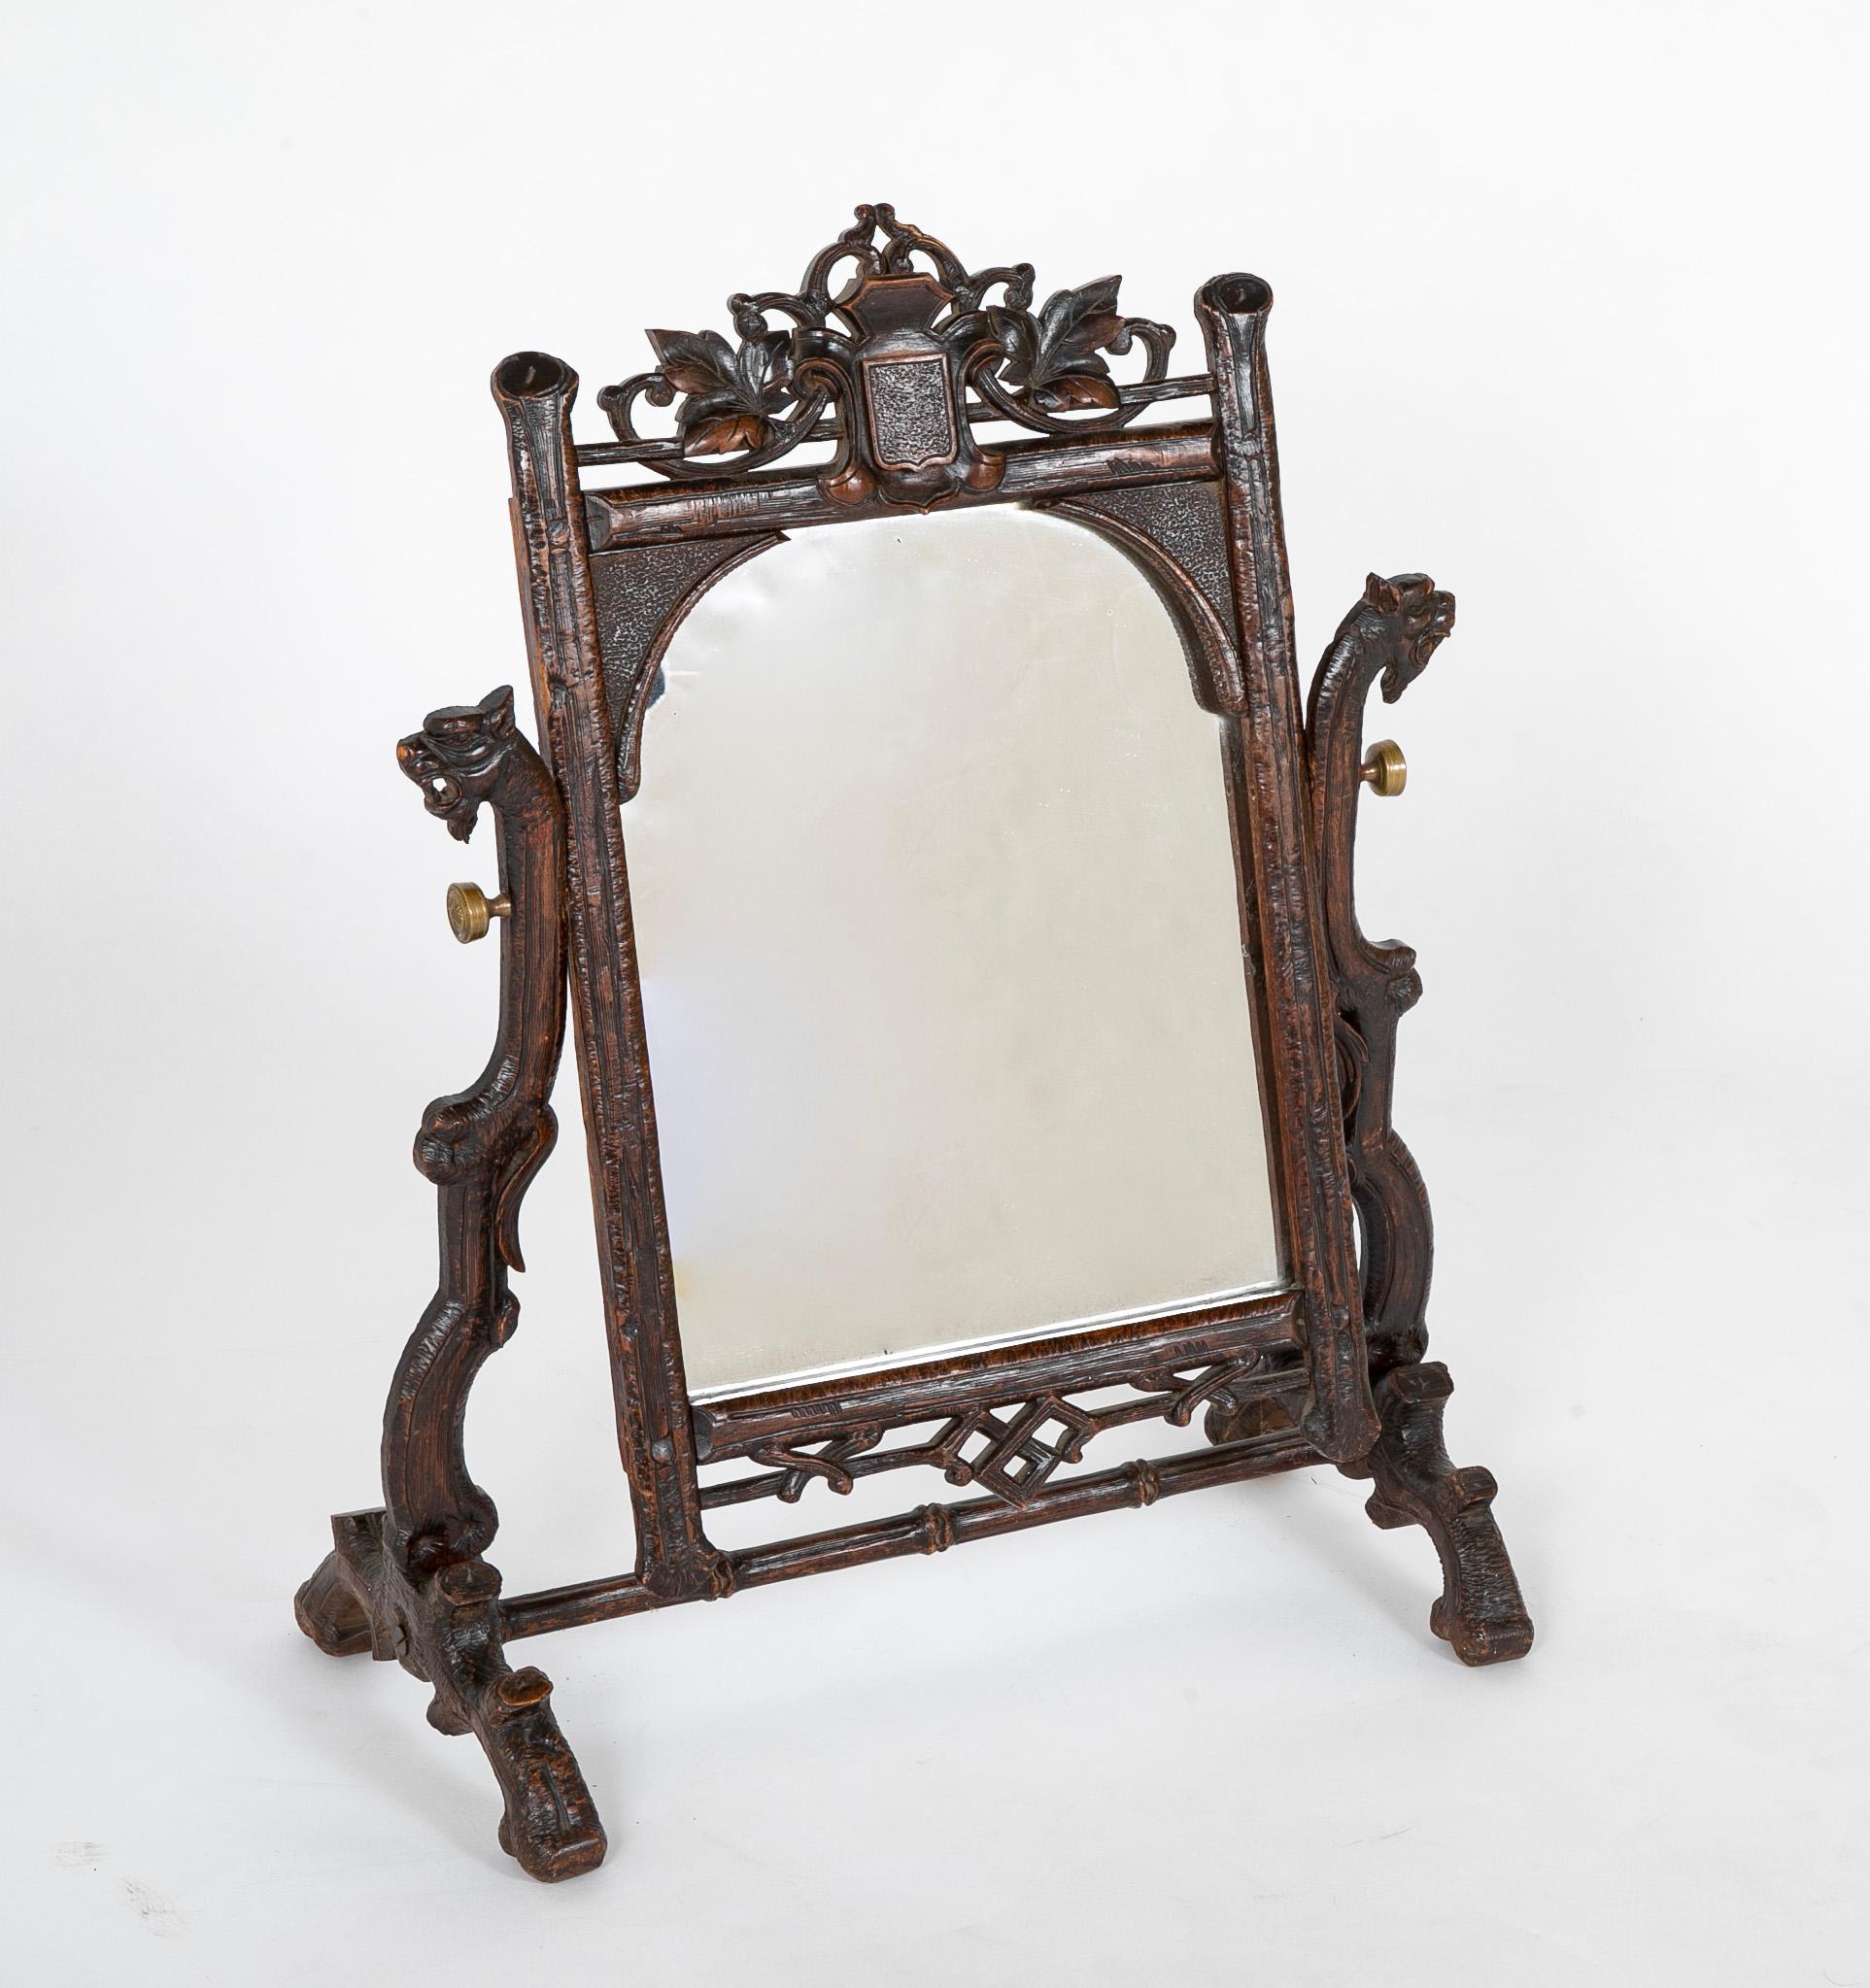 A rare Black Forest vanity / dressing mirror with gargoyle supports having naturalistic tree branch motif and elaborately carved oak leaves. Swivel mirror.